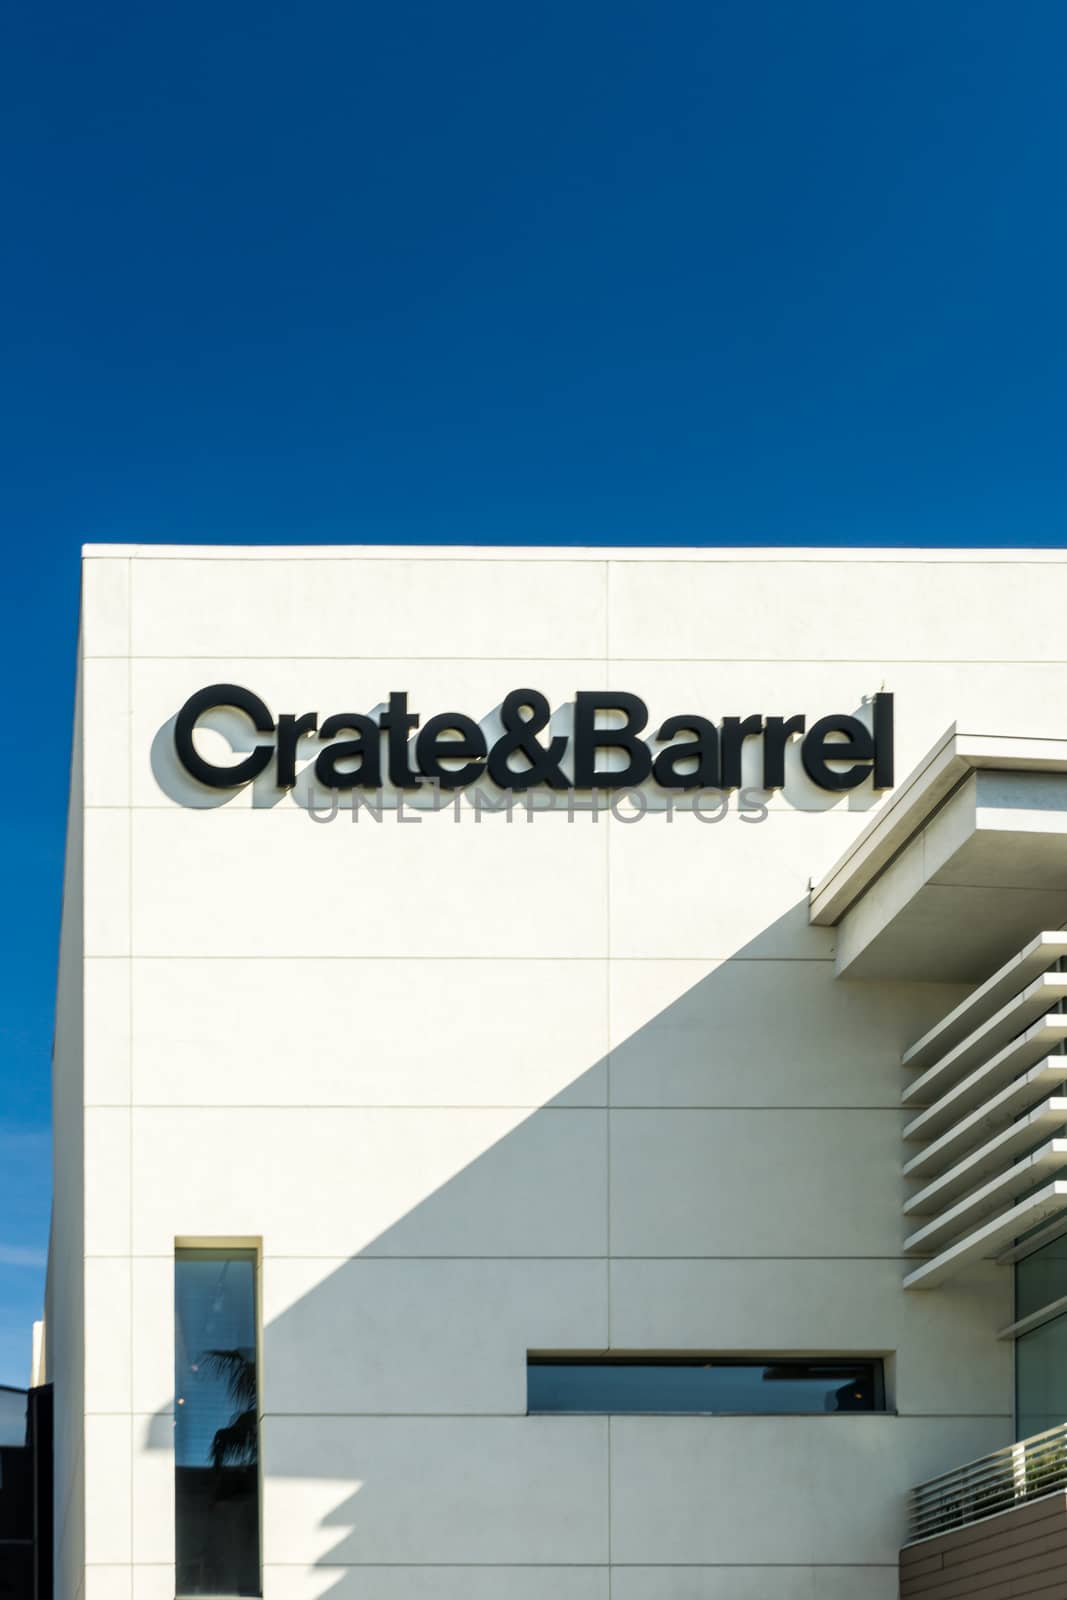 Crate & Barrel Store Exterior by wolterk